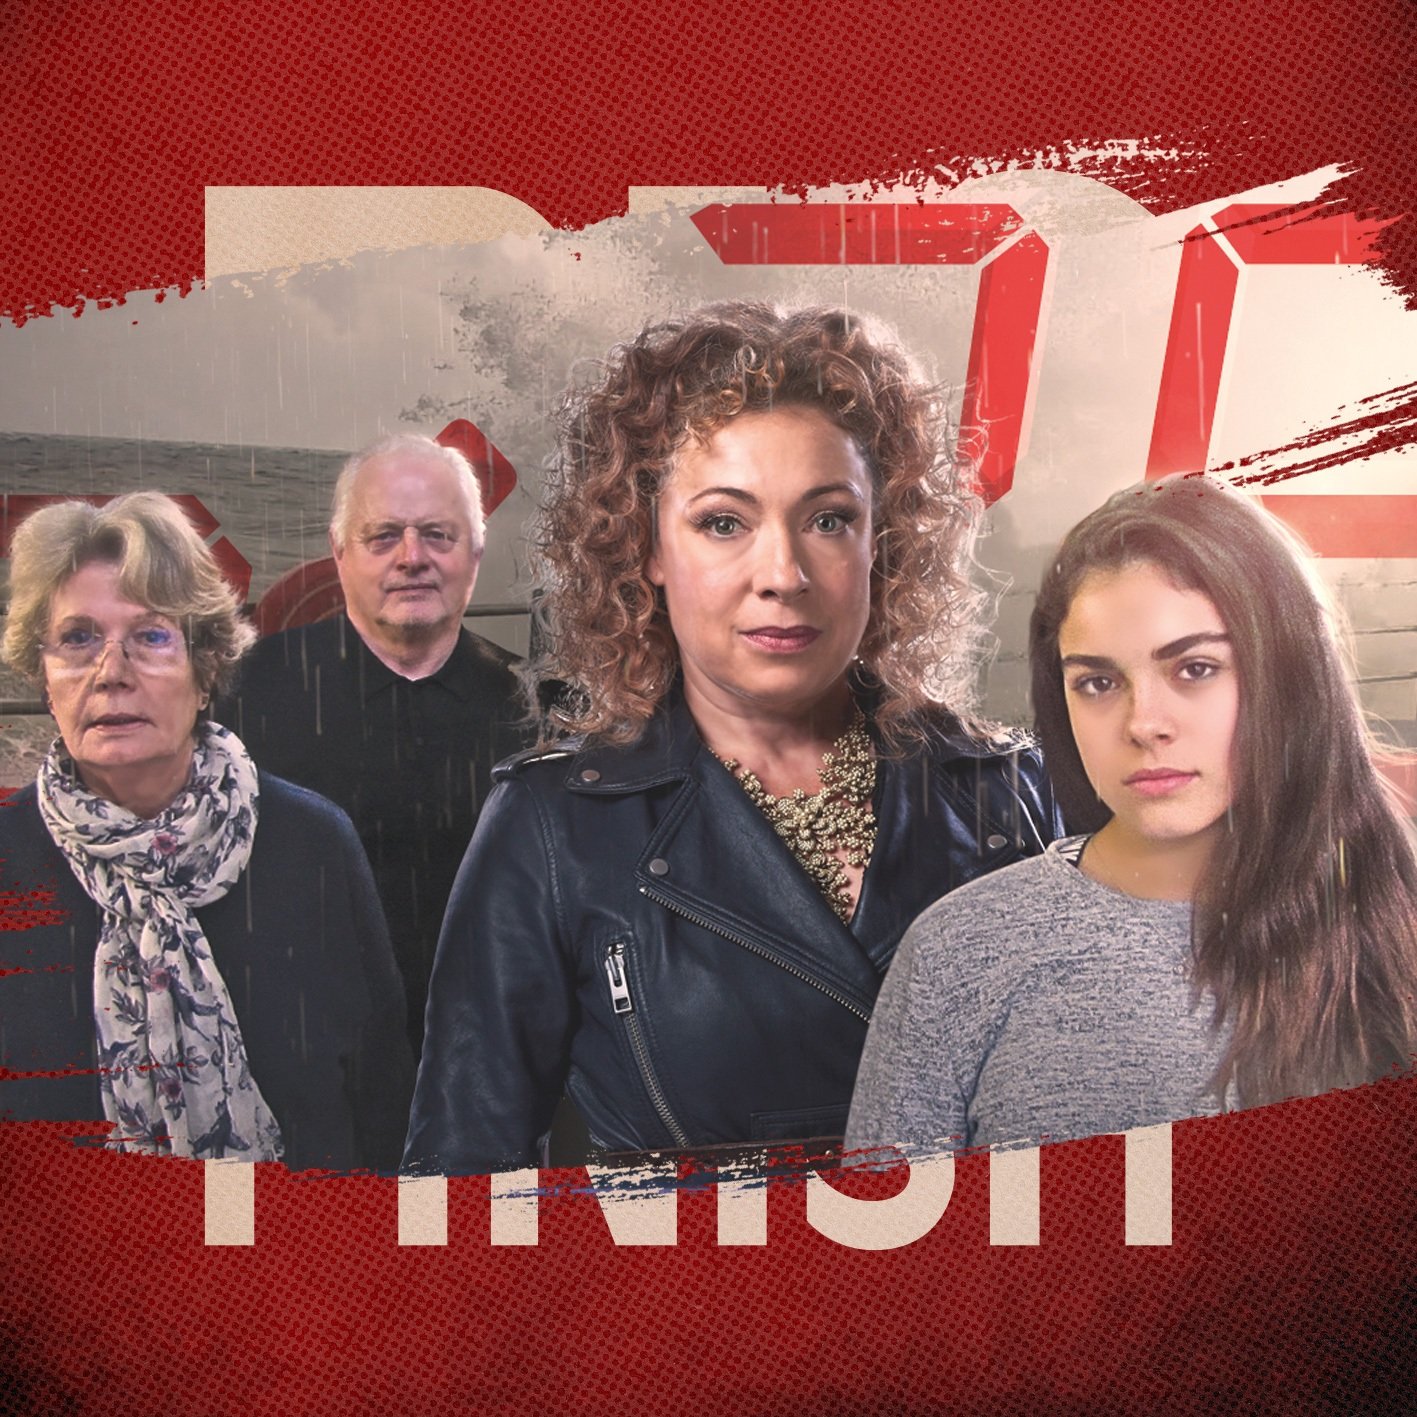 Download The Diary of River Song: Five Twenty-Nine, Starring Alex Kingston and Daughter, FREE!